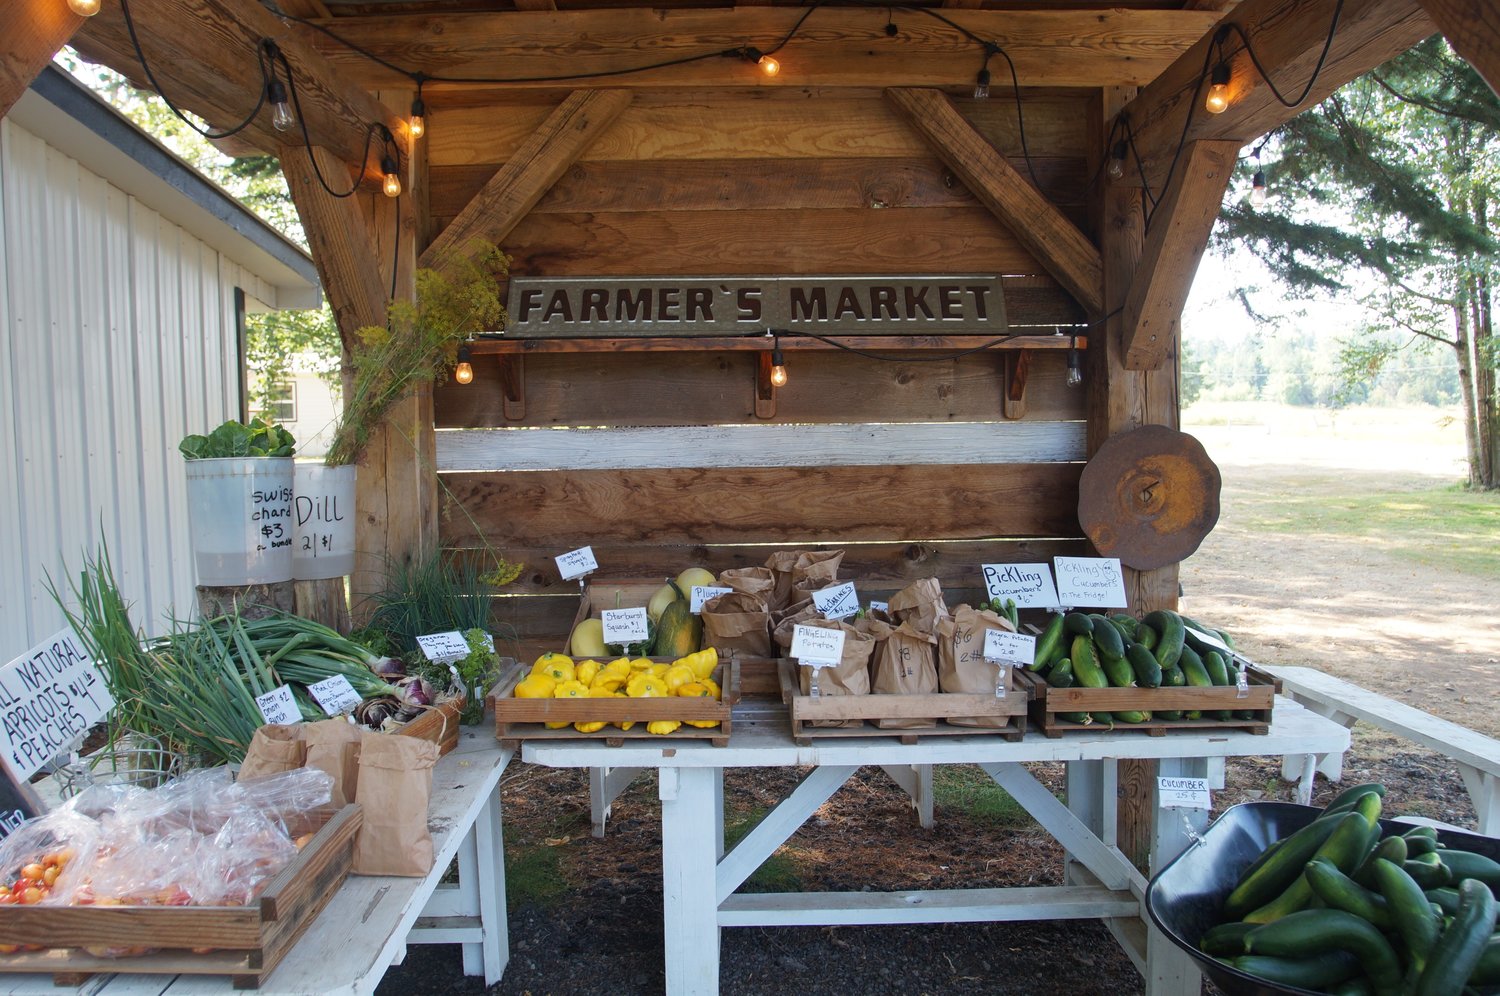 The year-round farm stand at Home Farm’s entrance offers a variety of fresh 
all-natural produce, including fruit from other farms.